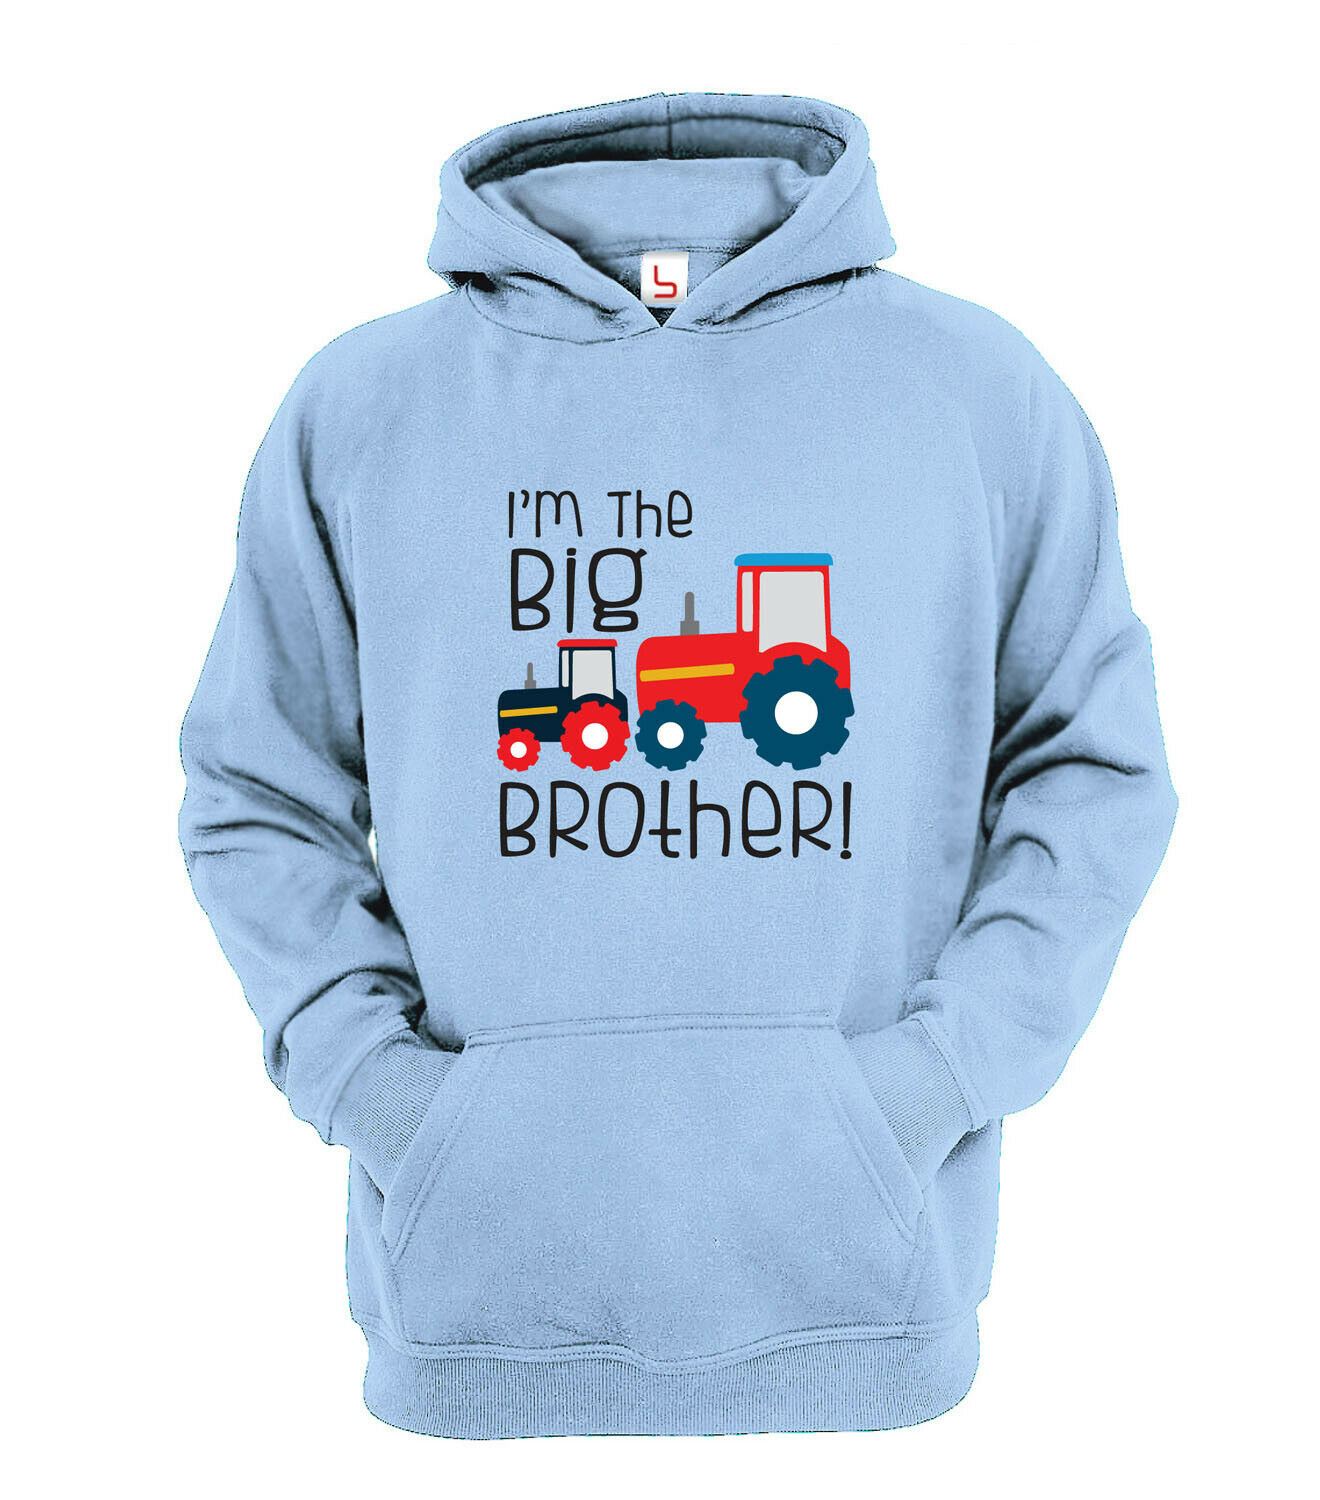 I'm the Big Brother Childrens Sweatshirt Clothing Boys Clothing Jumpers 